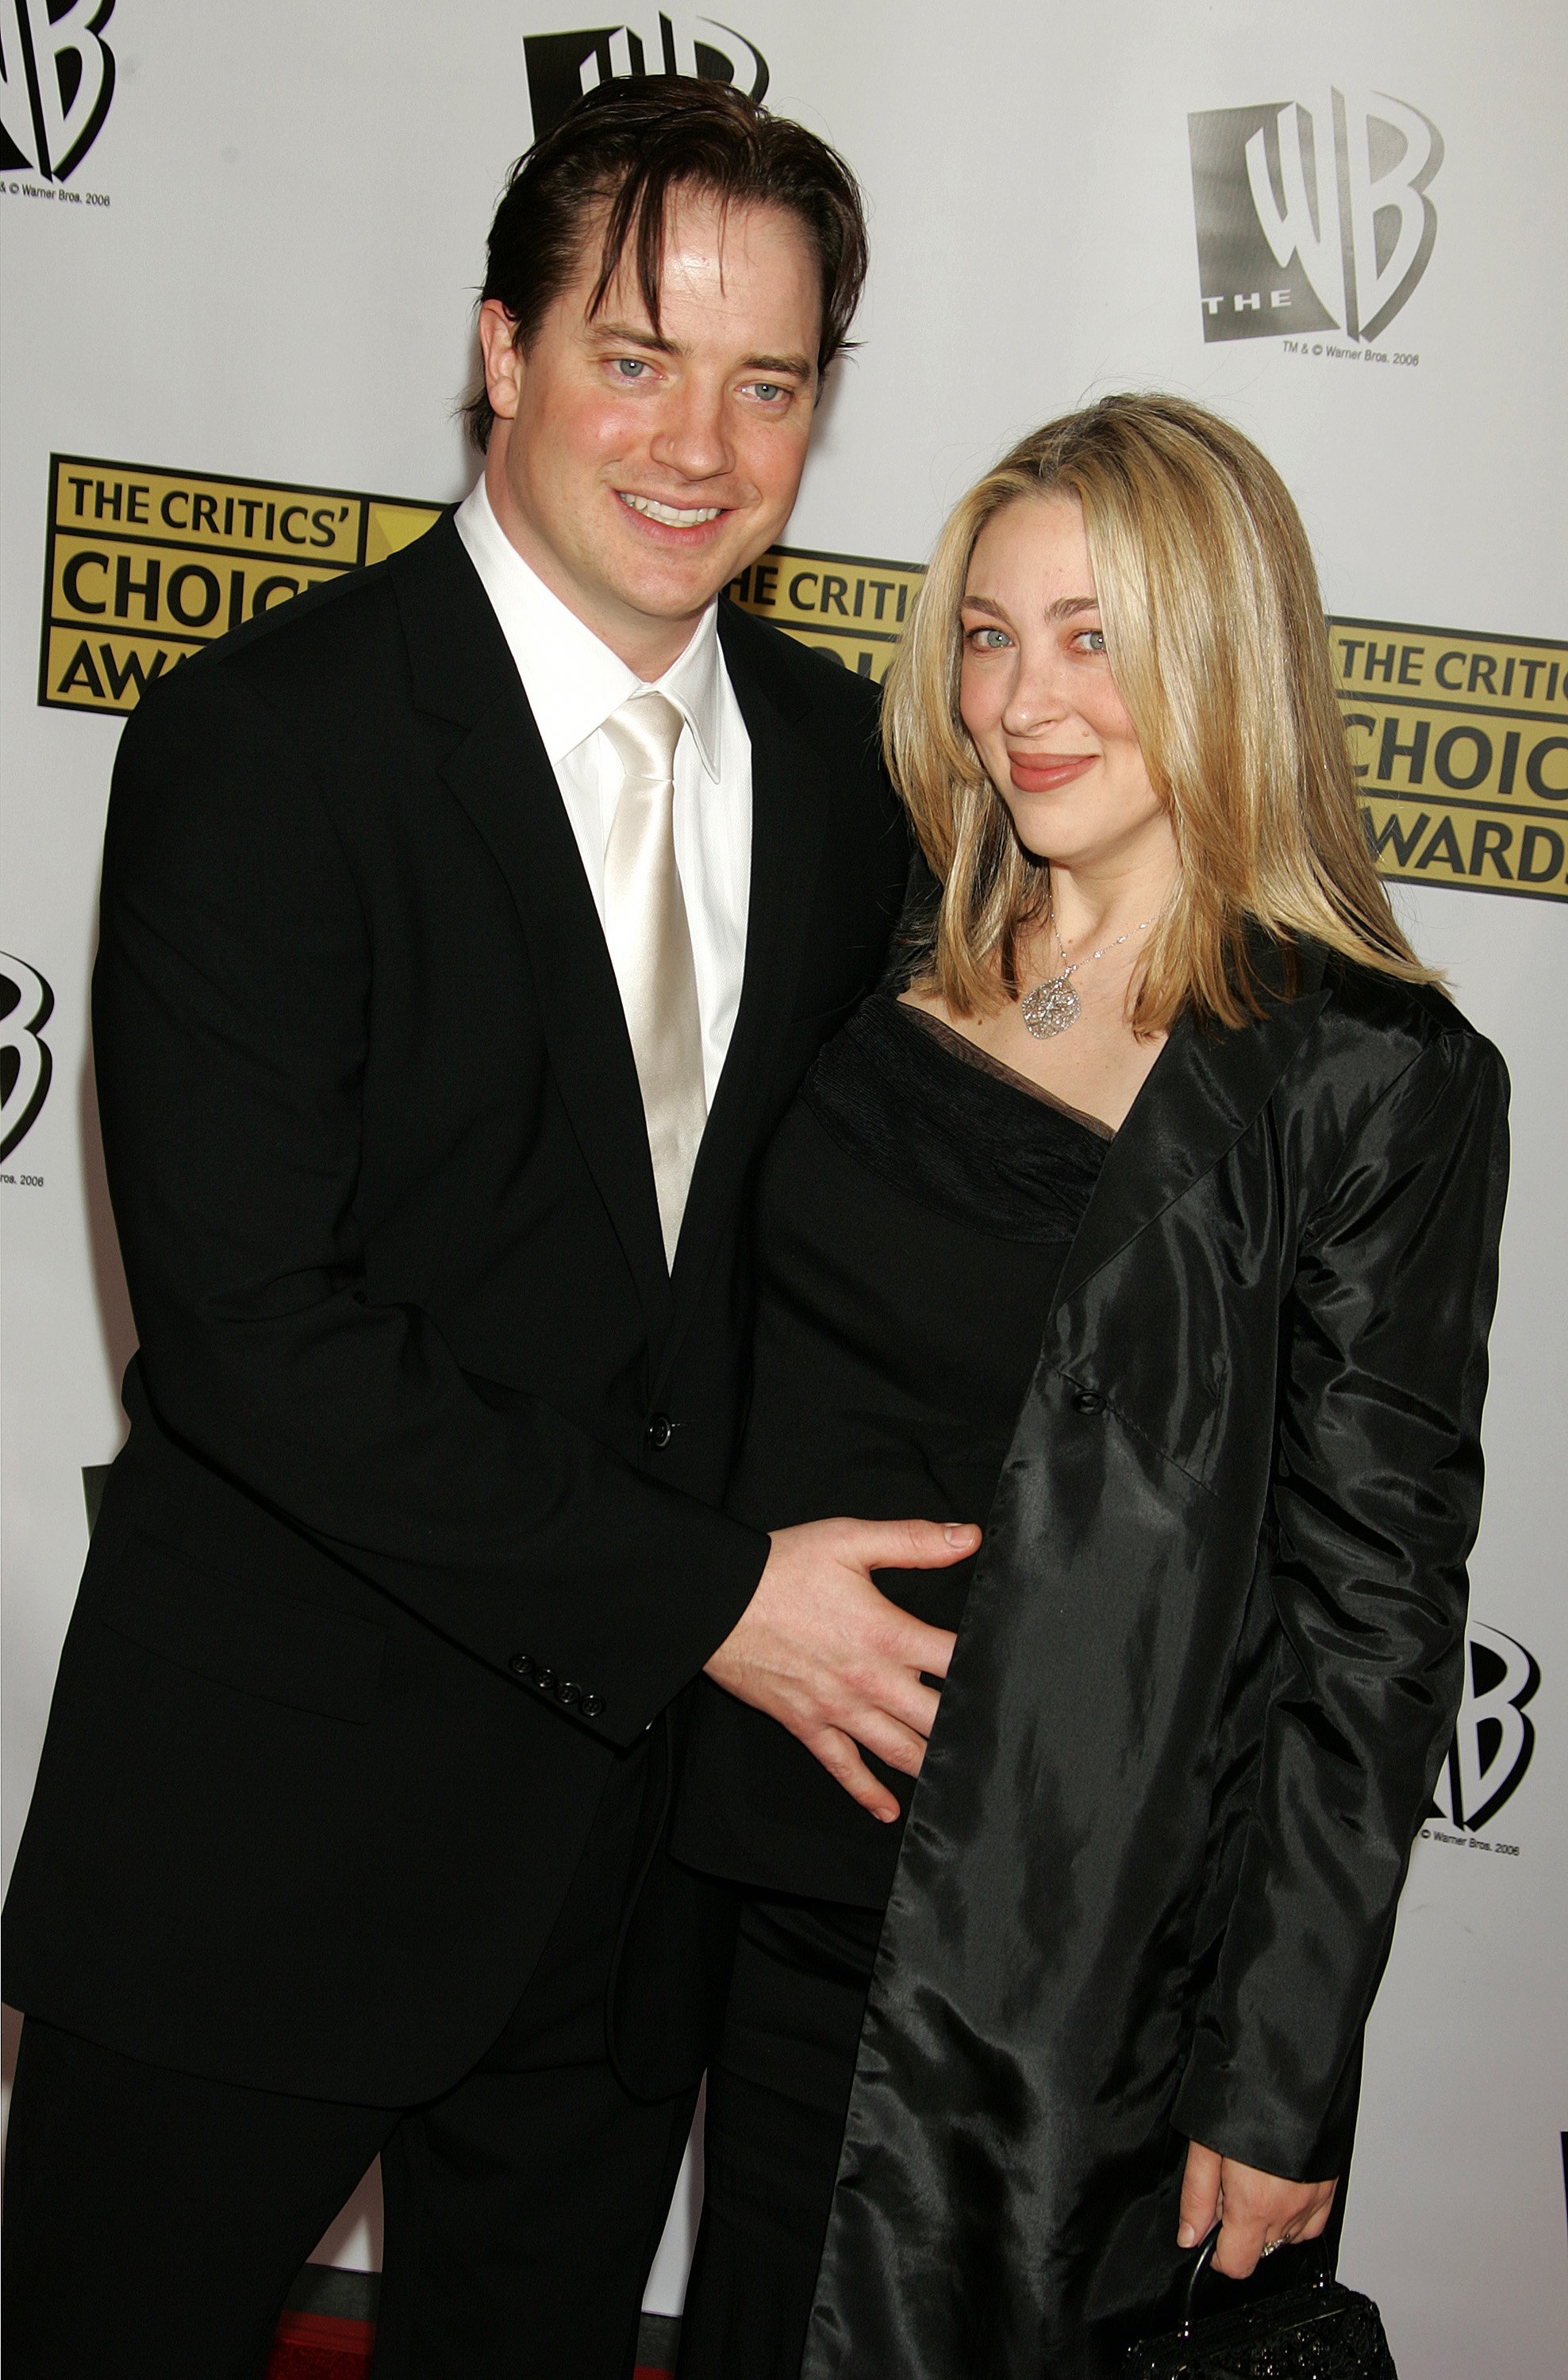 Brendan Fraser and his wife Afton Smith during the 11th Annual Critics' Choice Awards at Santa Monica Civic Auditorium on January 9, 2006 in Santa Monica, California ┃Source: Getty Images